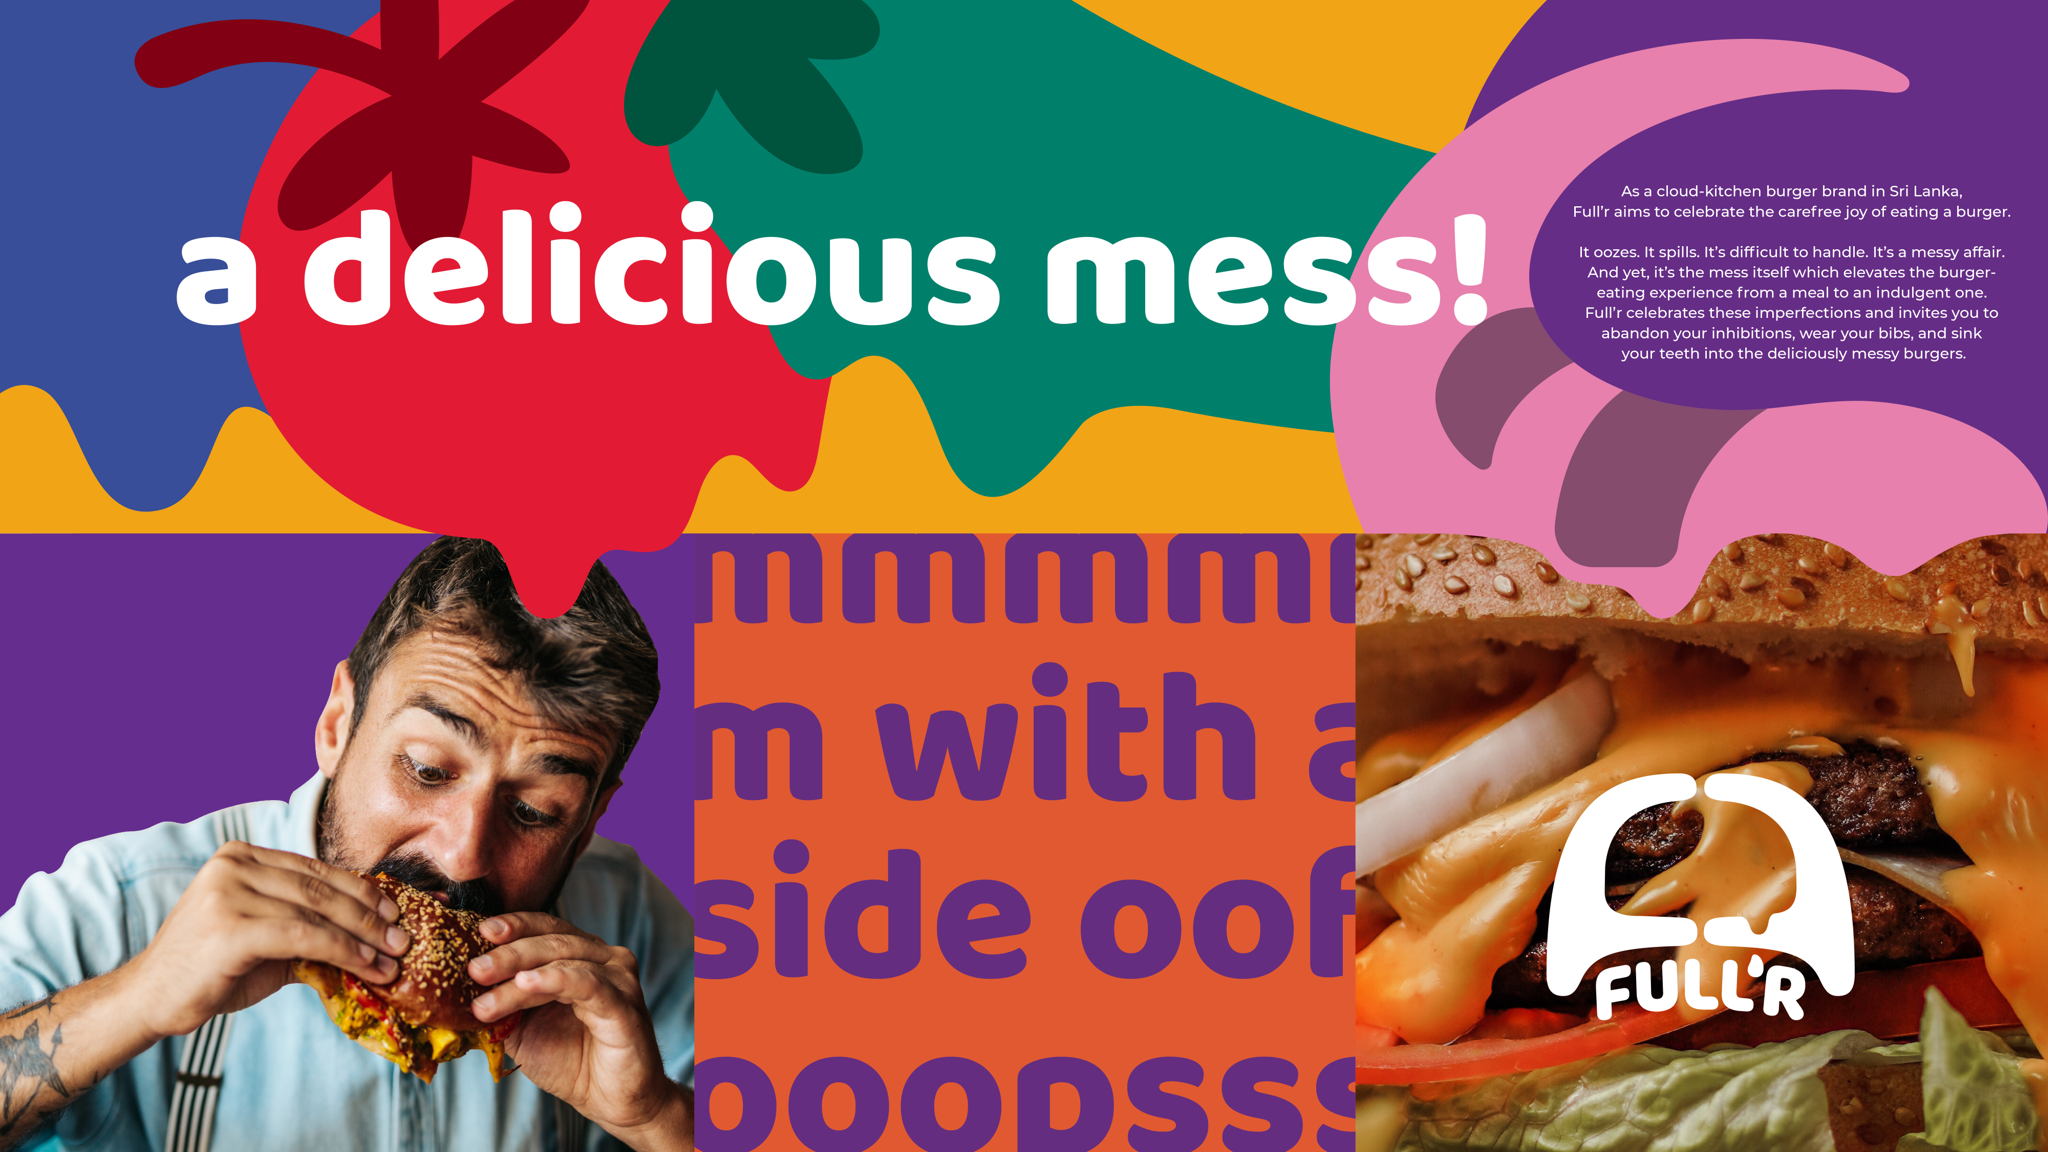 TEXTLINE GOLD: Are you a food mixer or divider? - triple j